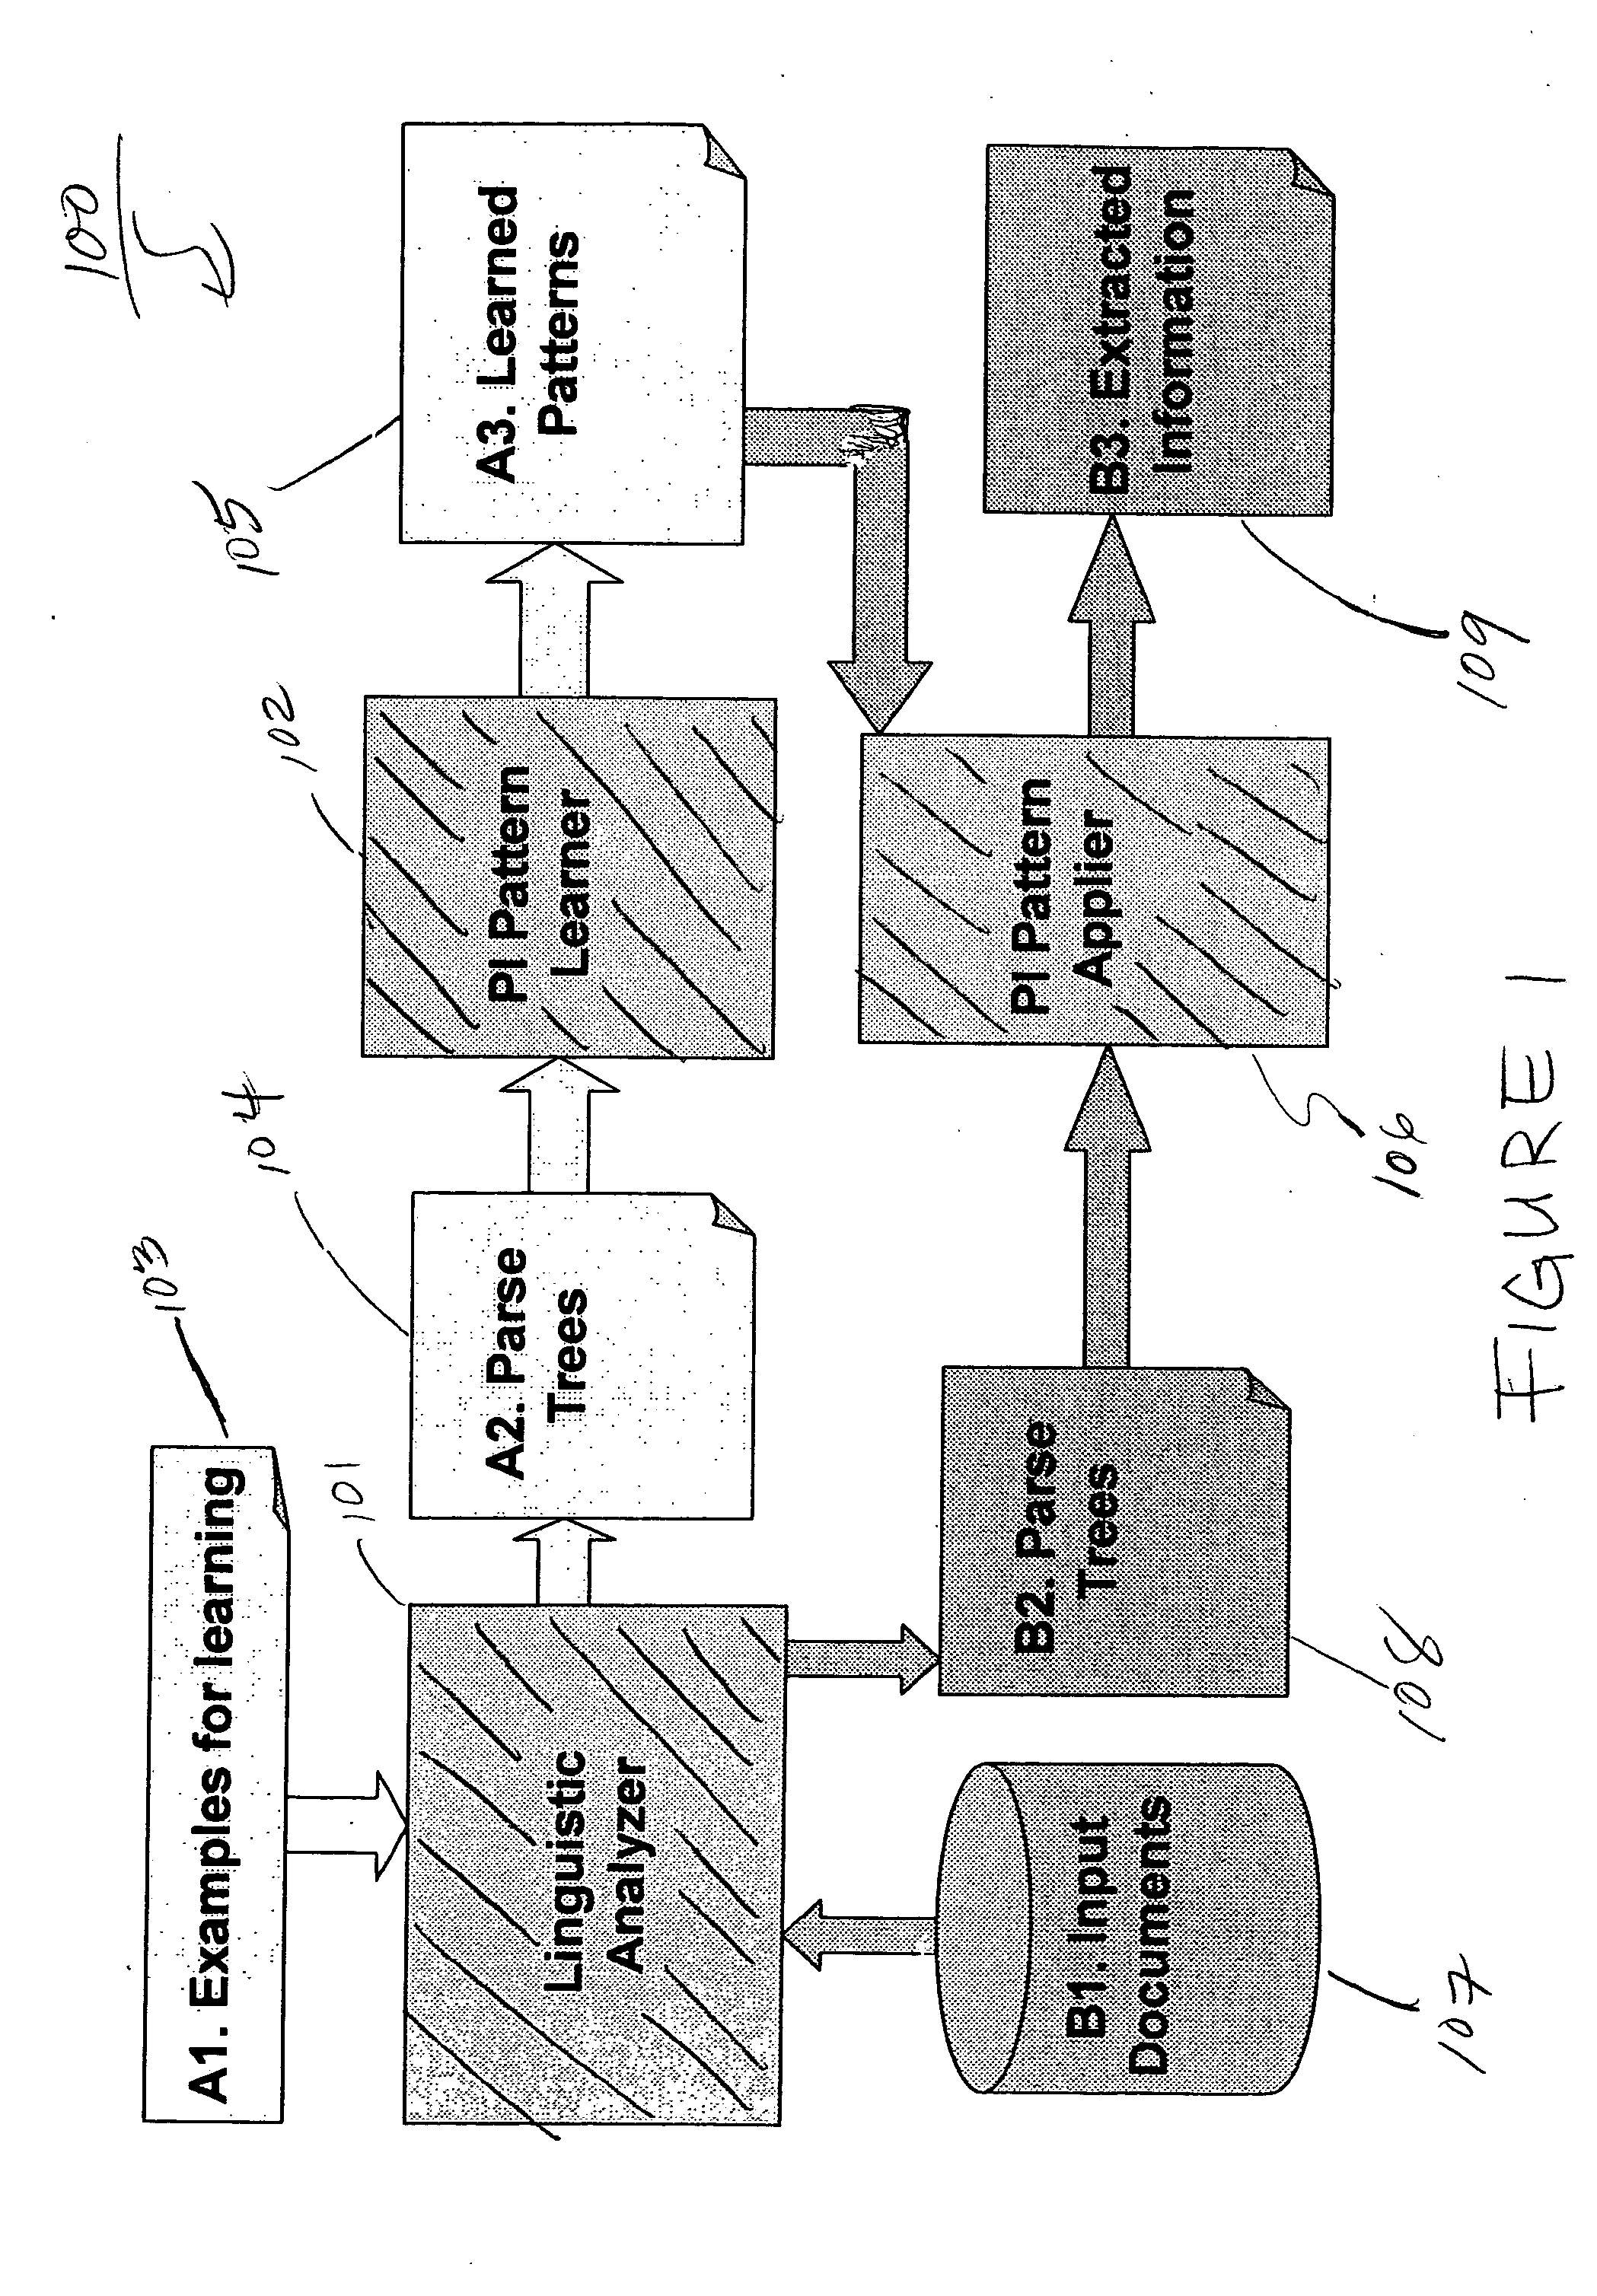 Method and system for extracting information from unstructured text using symbolic machine learning